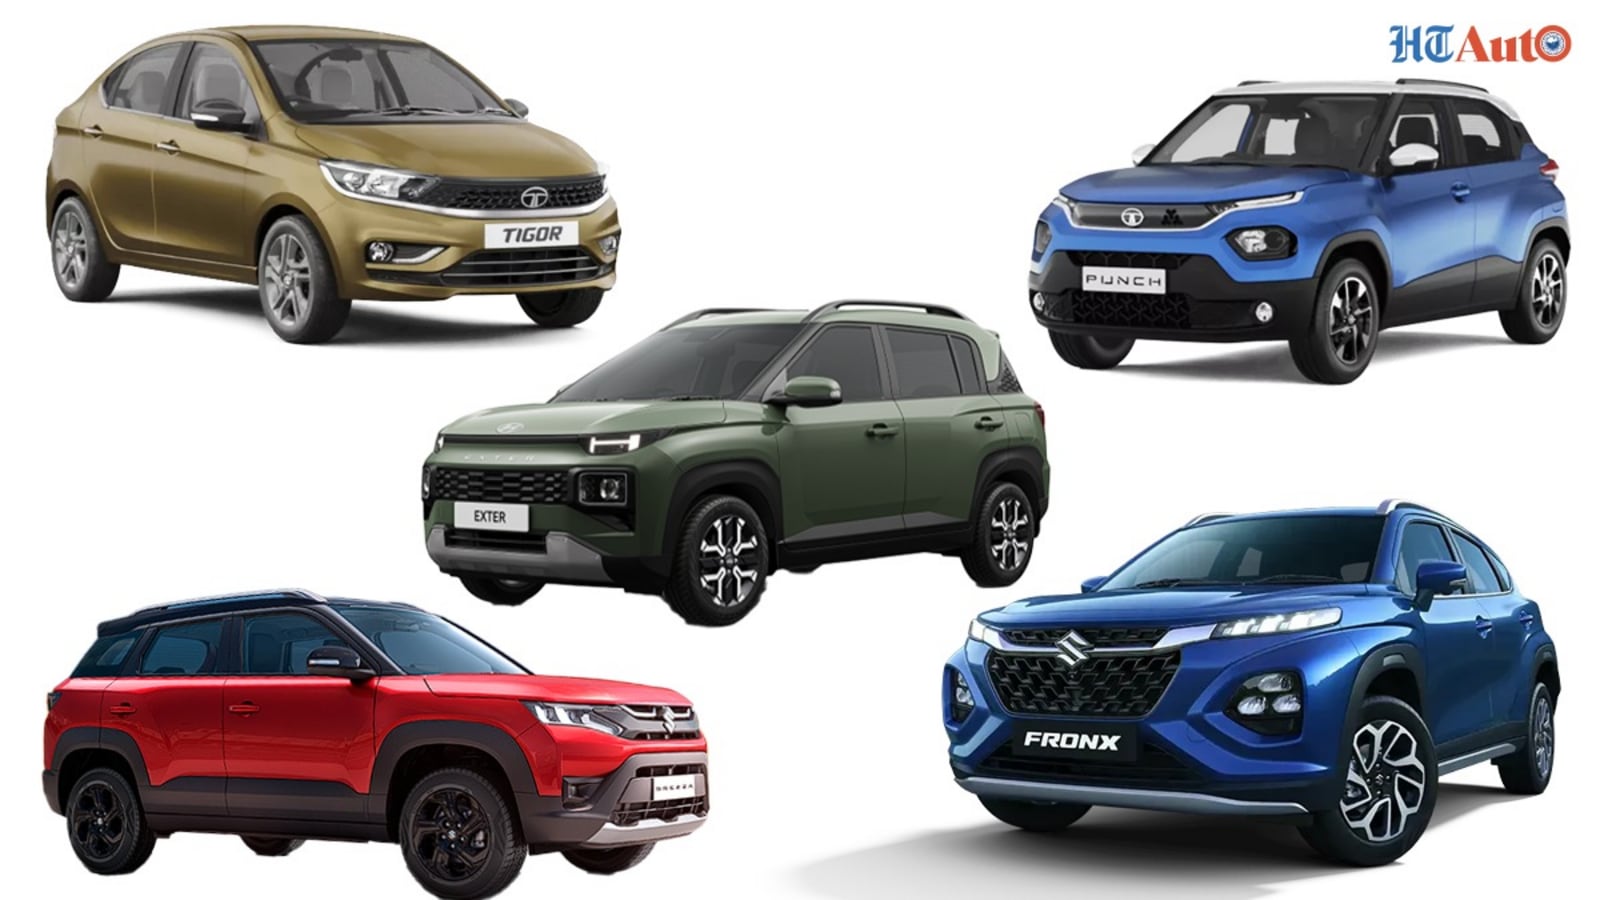 Hyundai Exter to Tata Punch: Five cars under ₹10 lakh with CNG powertrain